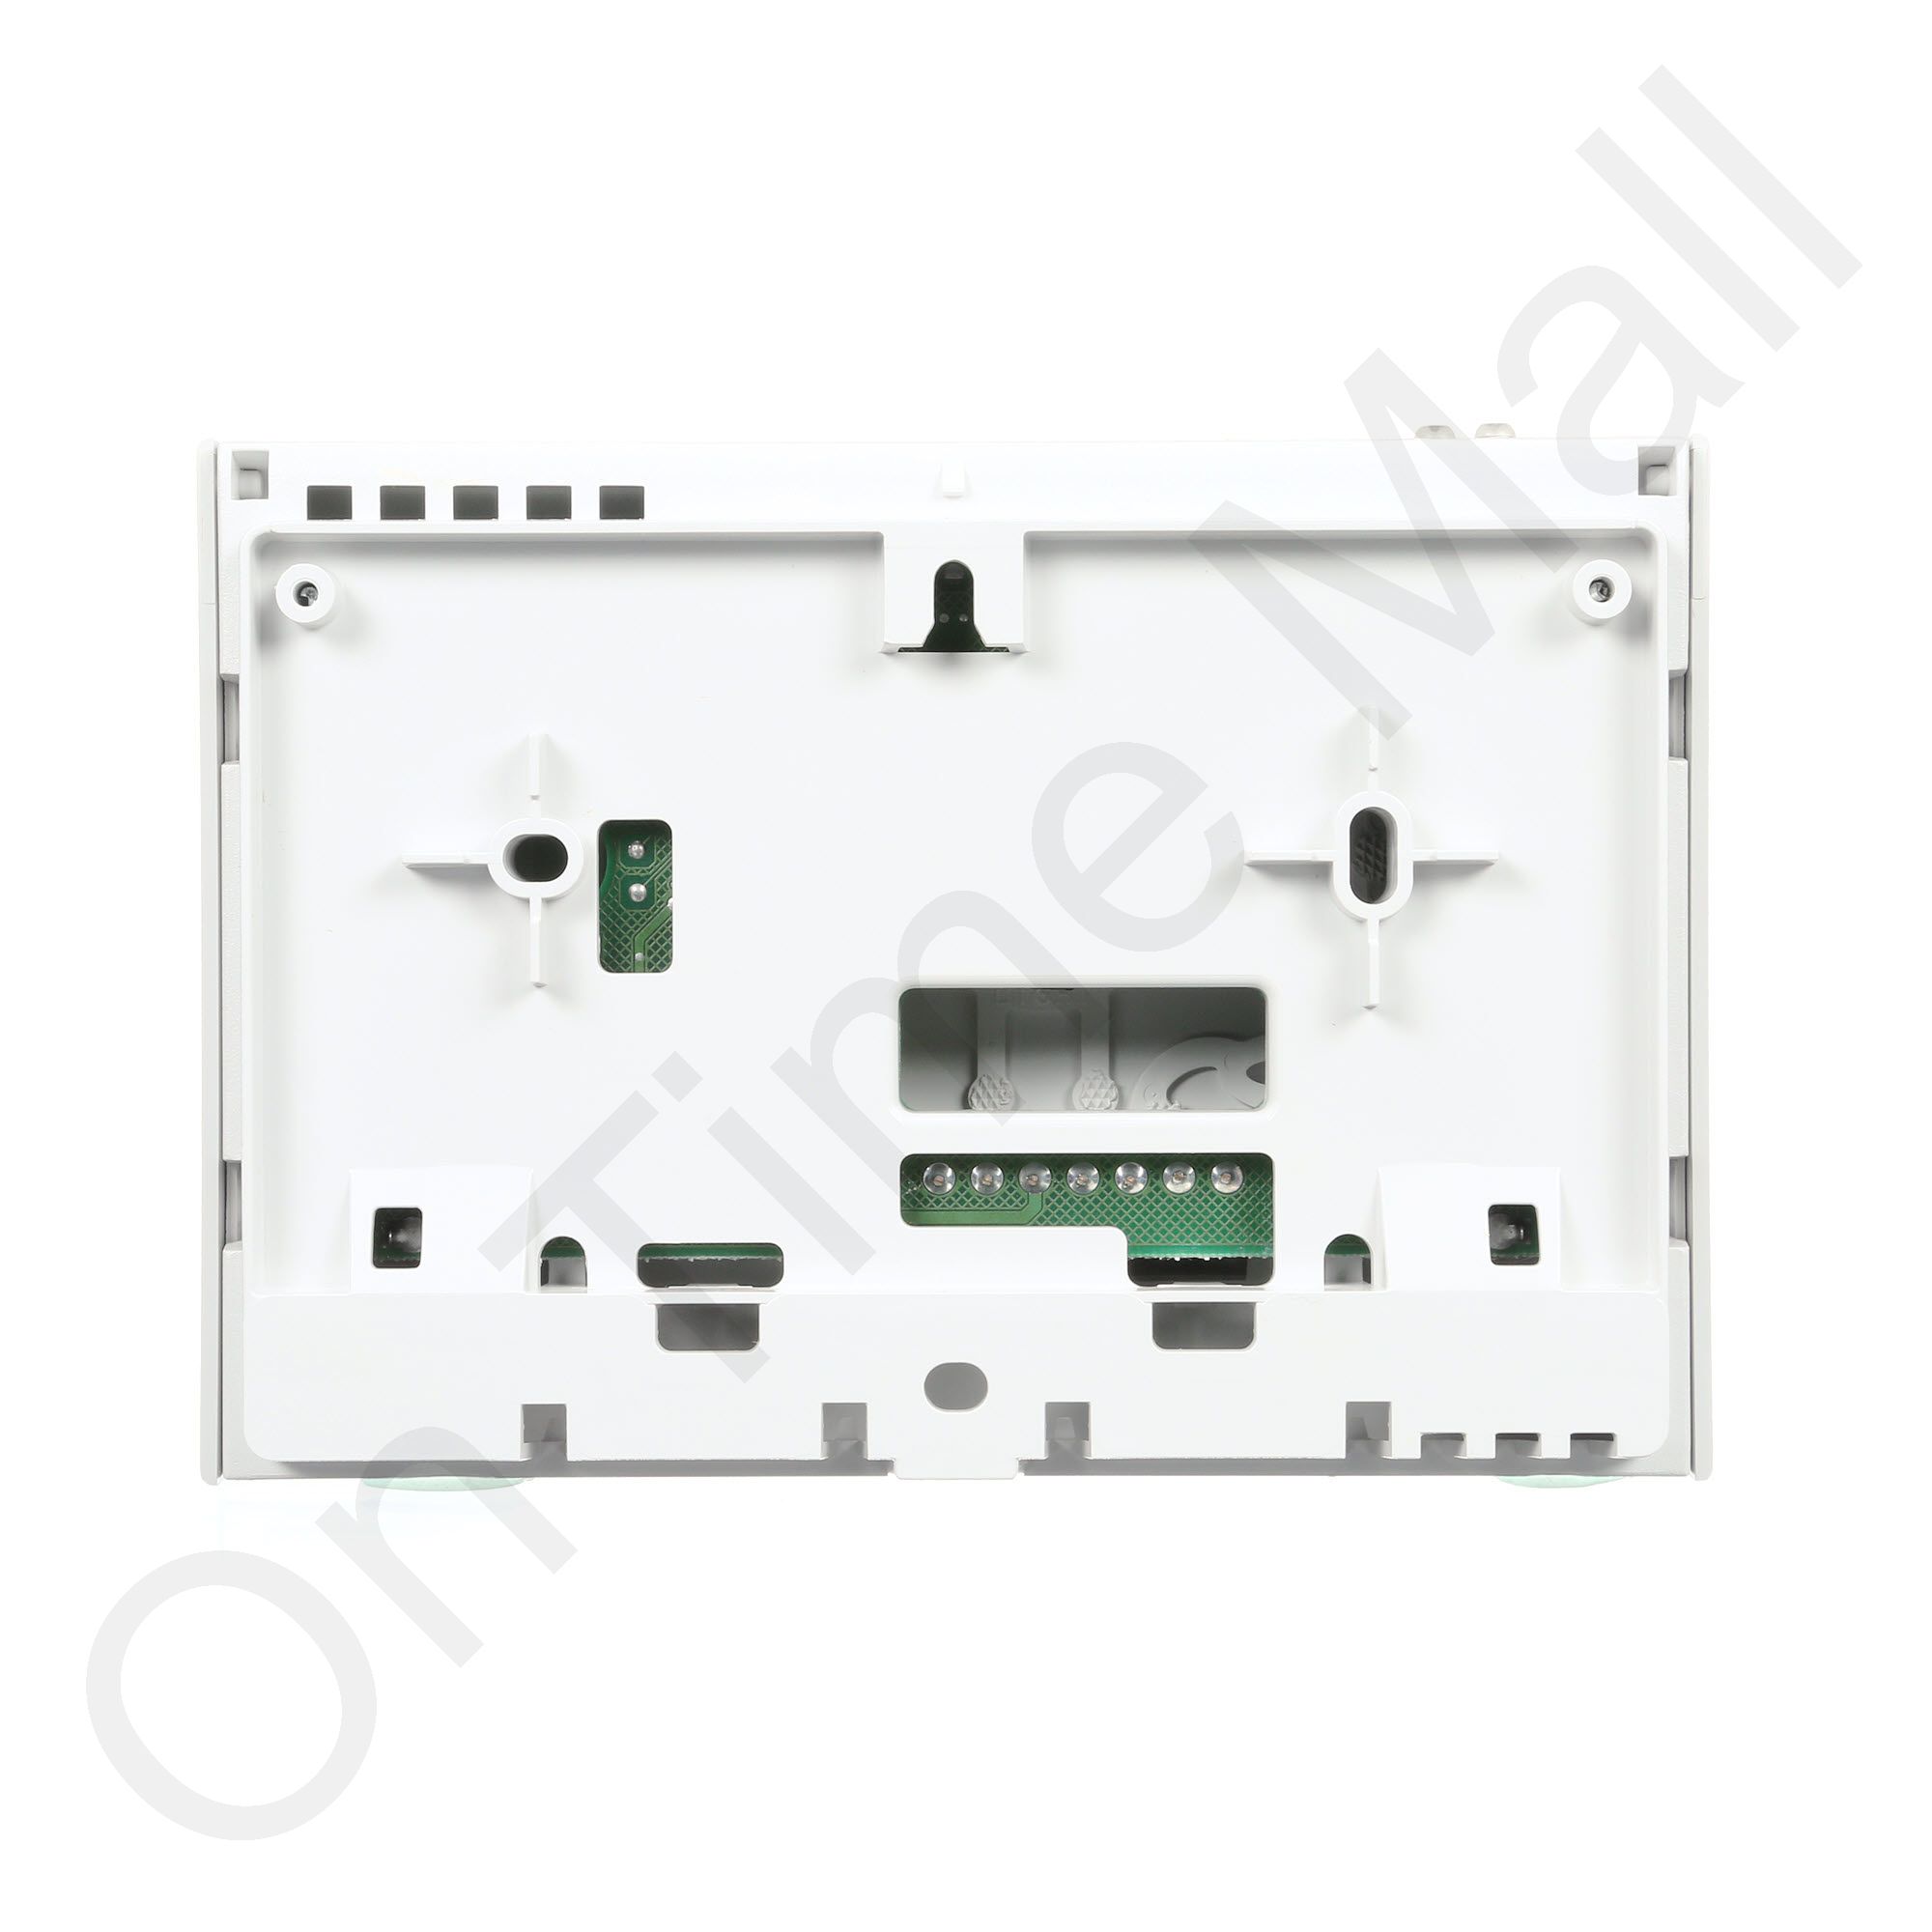 Taco 568-22 568 Battery Operated w/ Digital Display Thermostat, replacement  for 568-21, 568-20